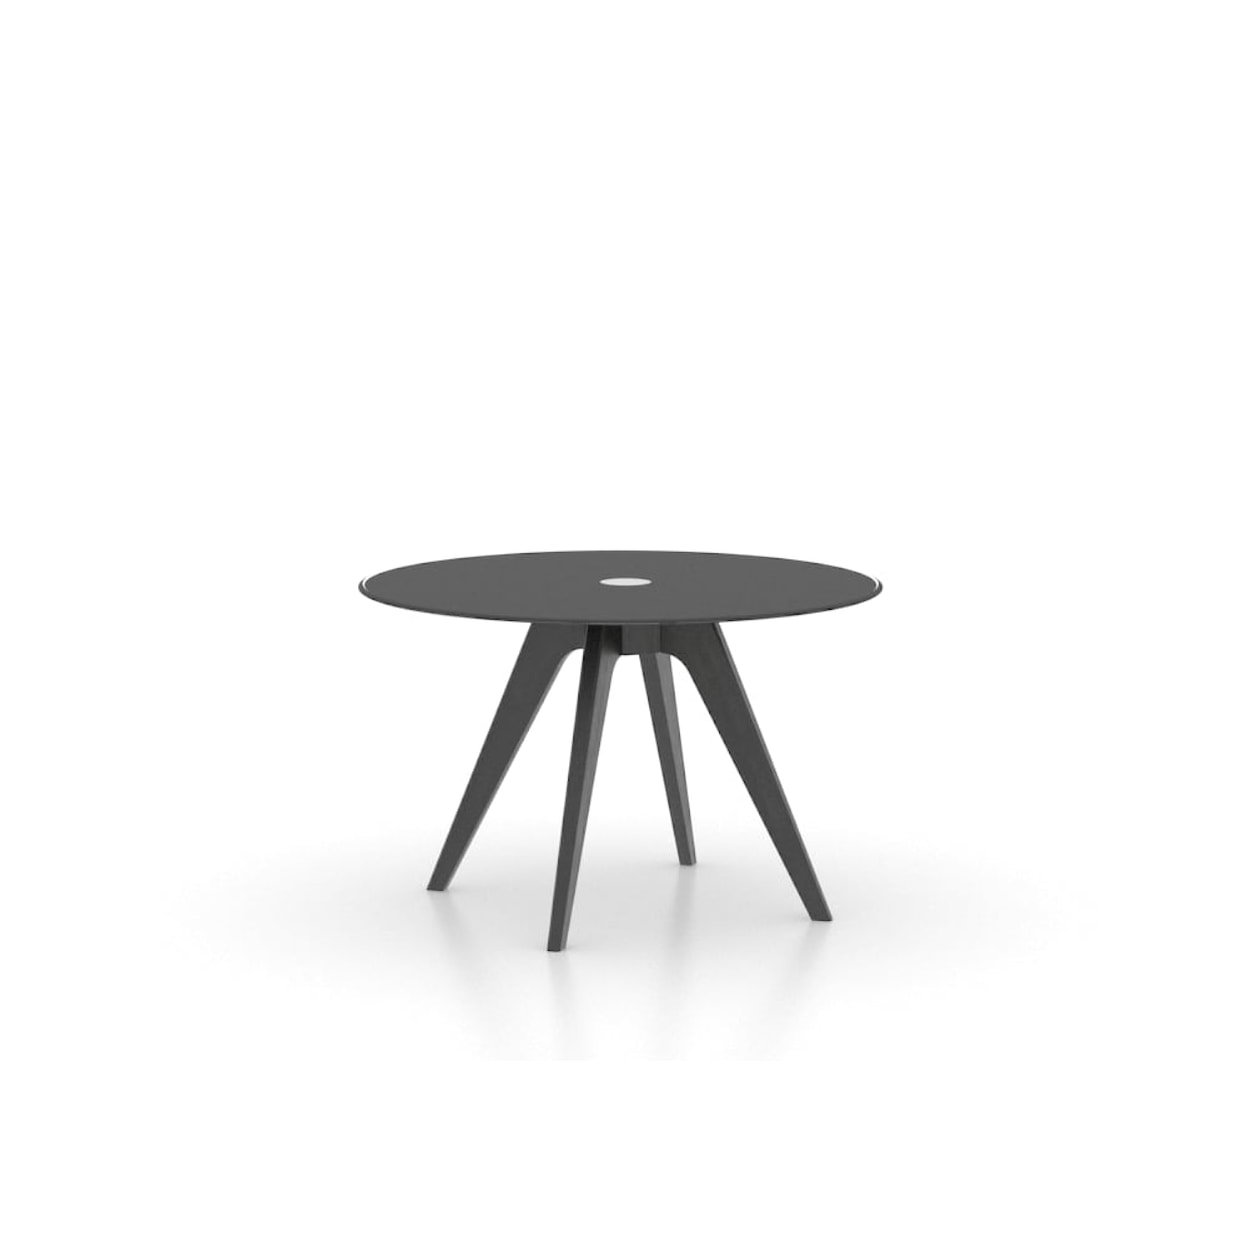 Canadel Downtown Customizable Dining Table